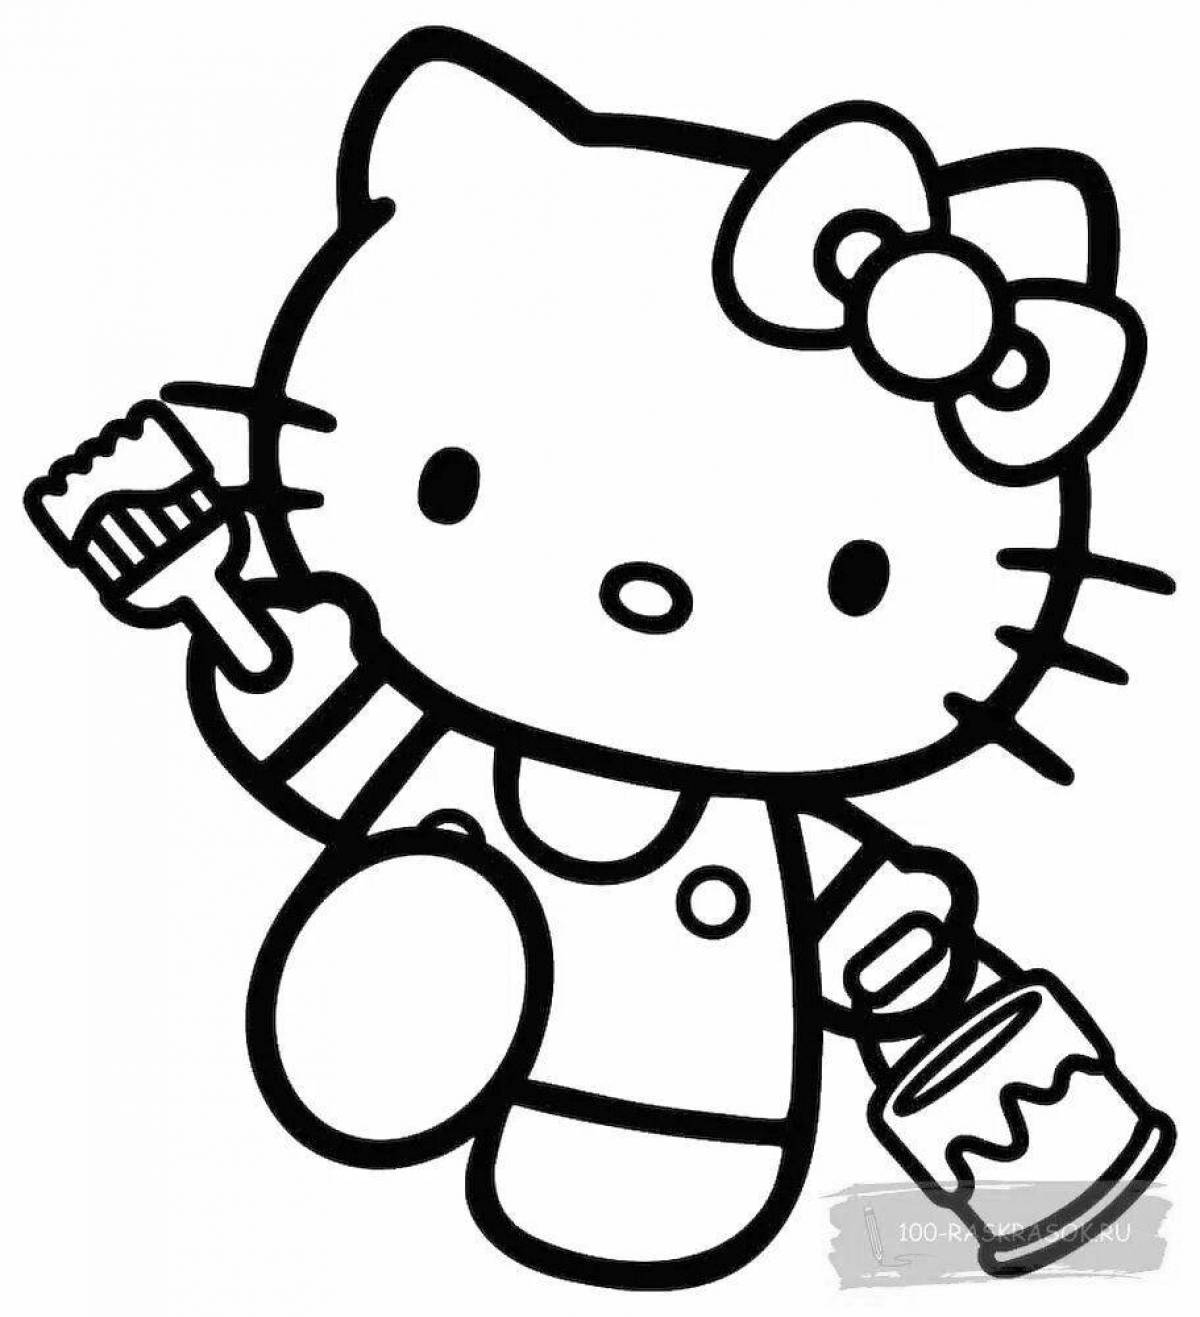 Coloring book glowing hello kitty doll